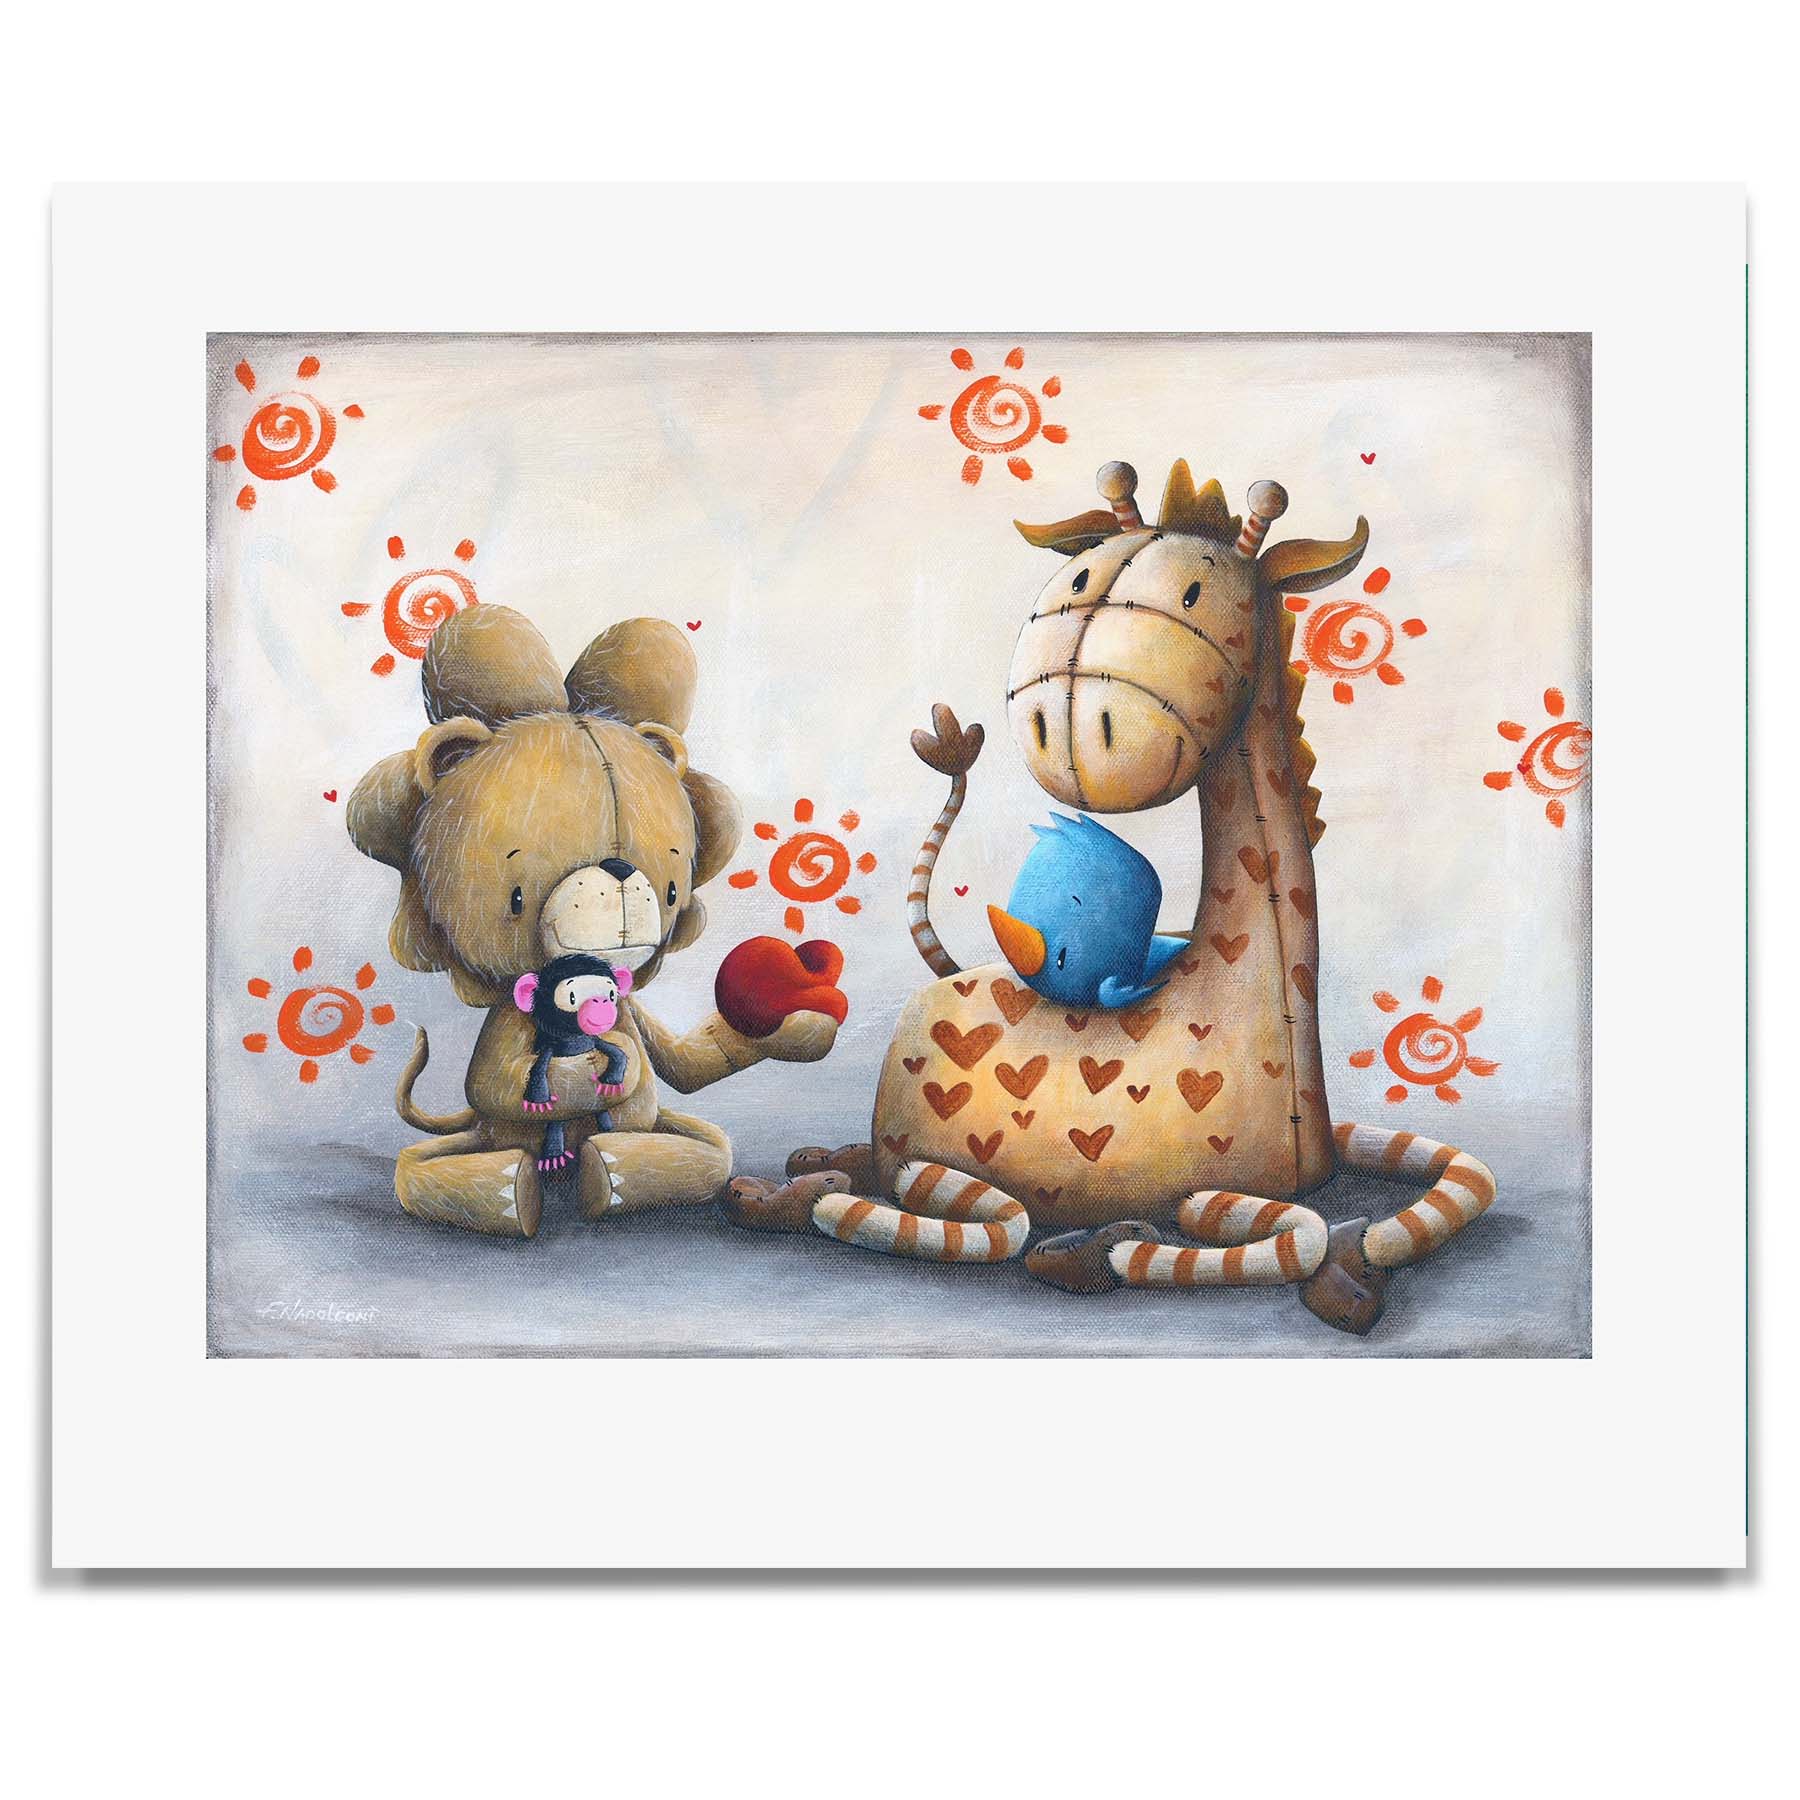 Fabio Napoleoni "It's for All of Us" Limited Edition Paper Giclee